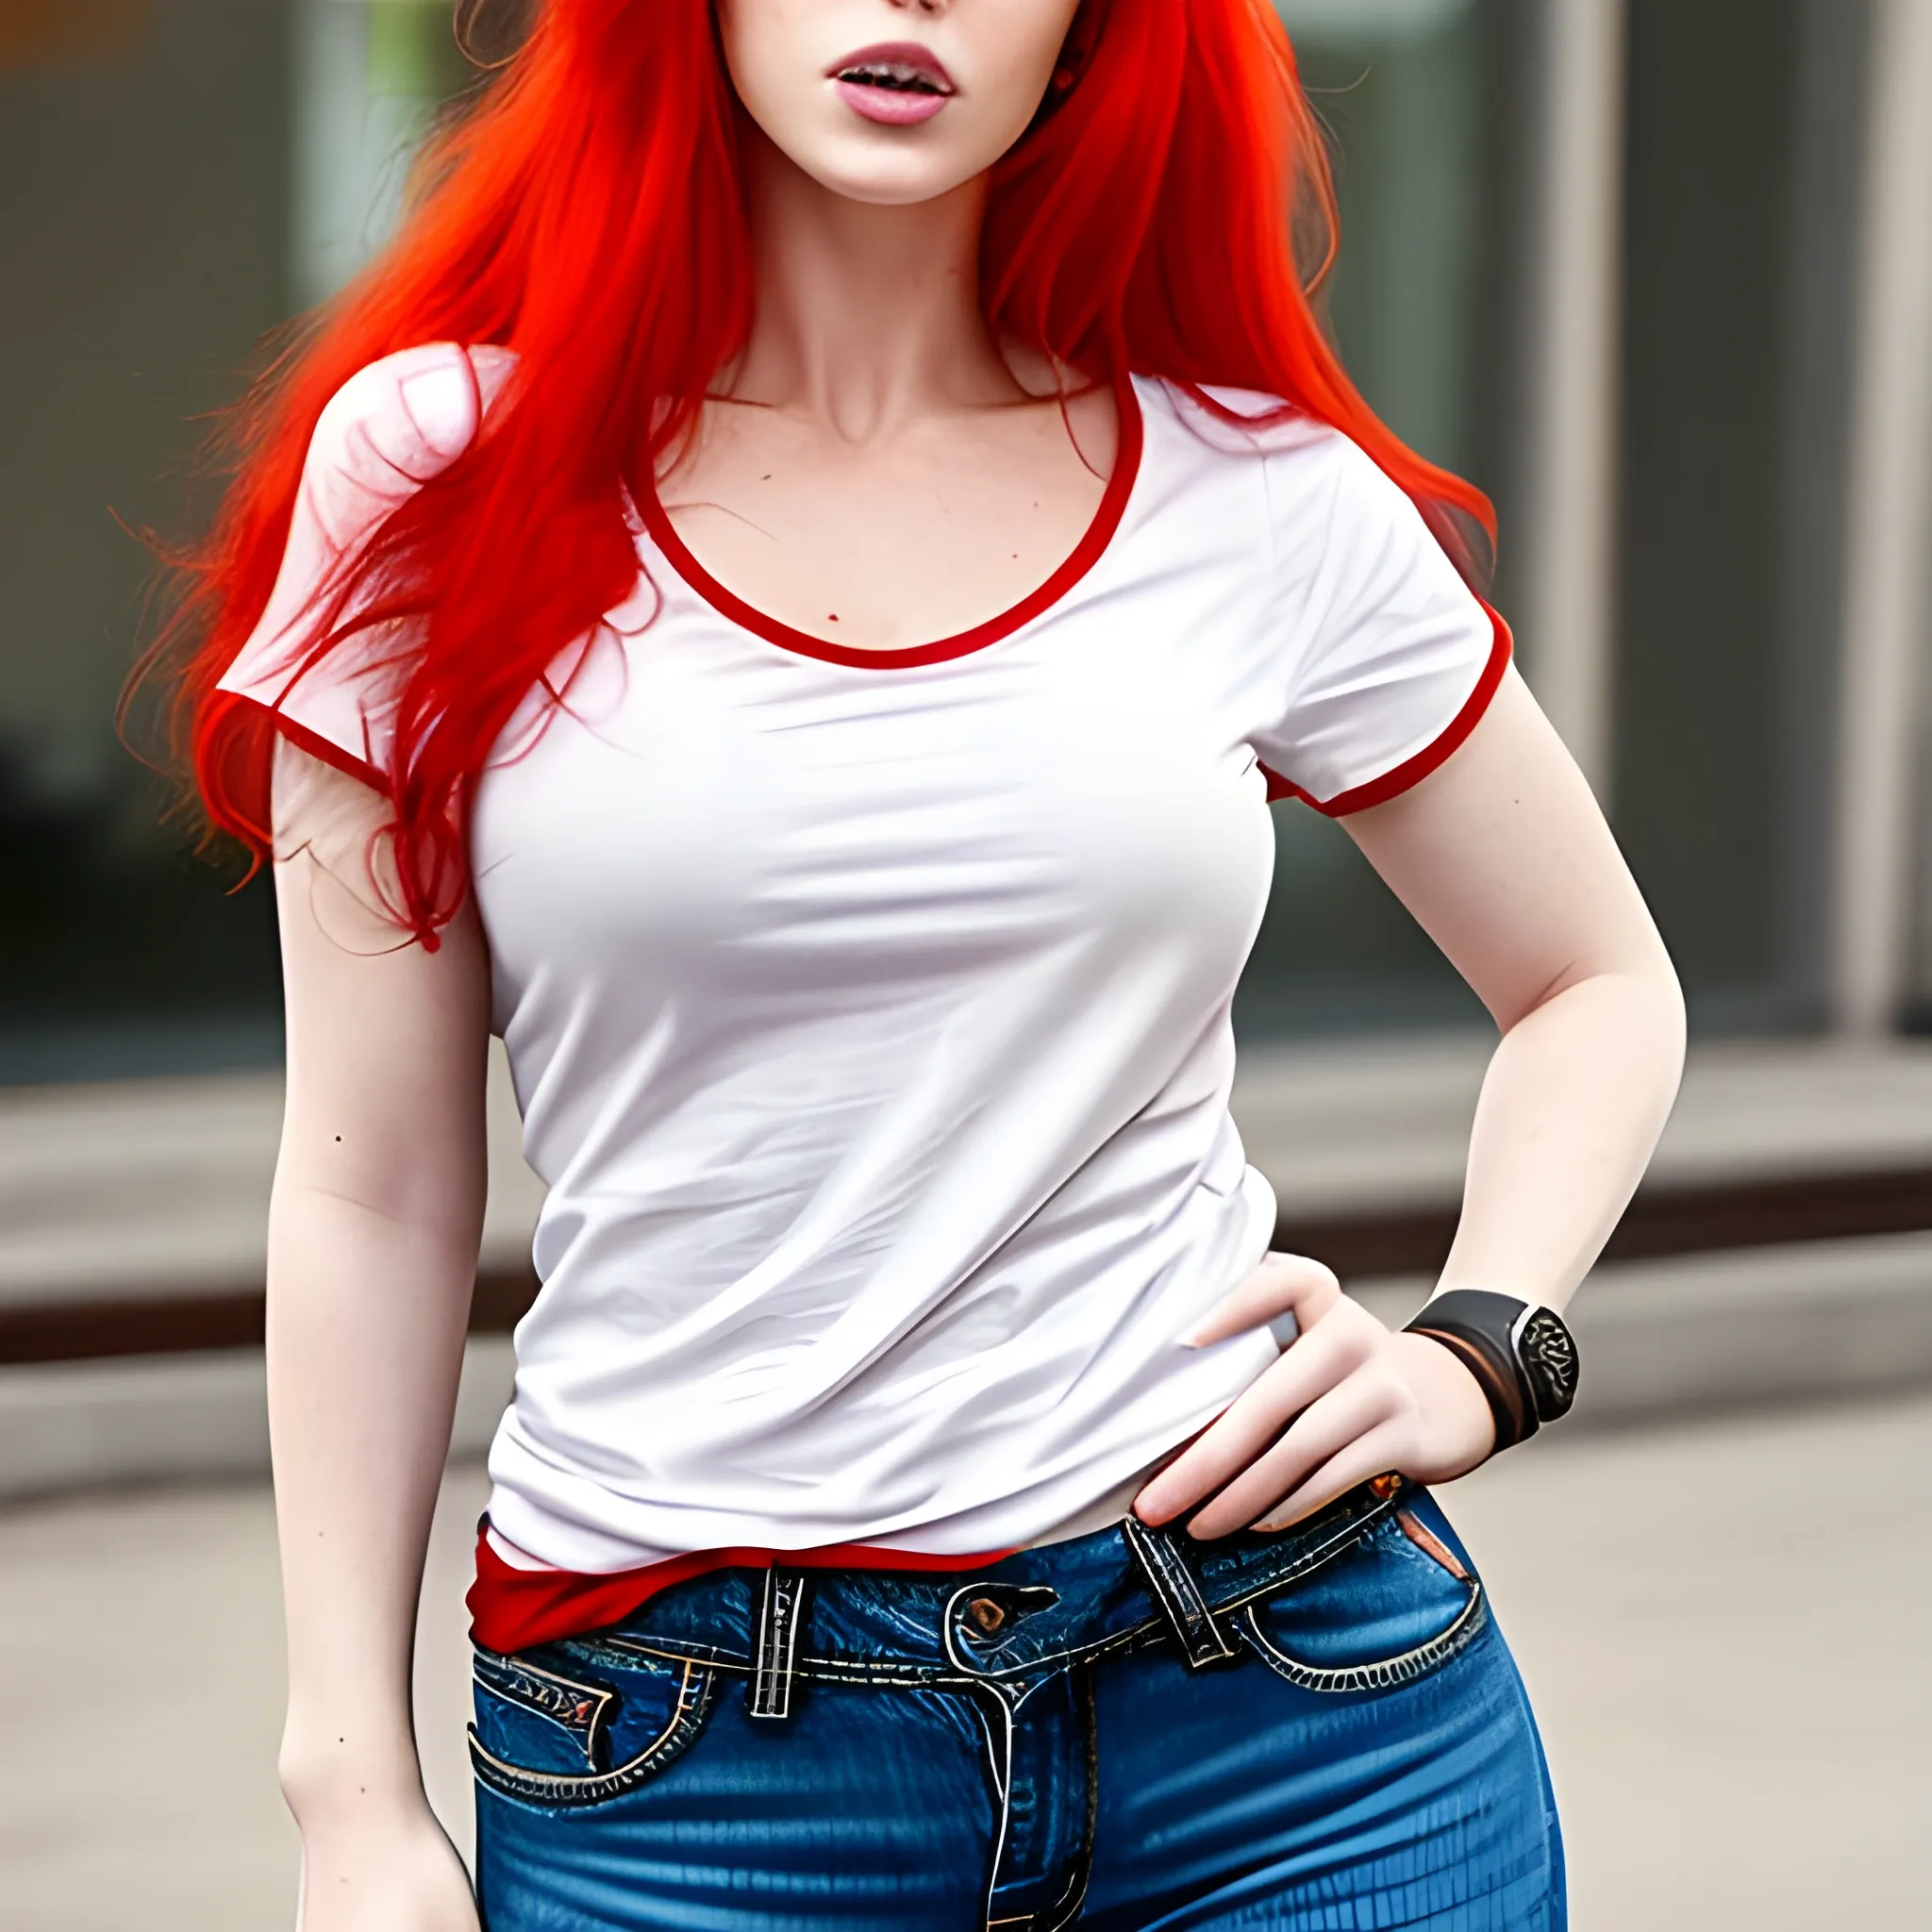 Attractive woman with red hair and large chest in t-shirt and je